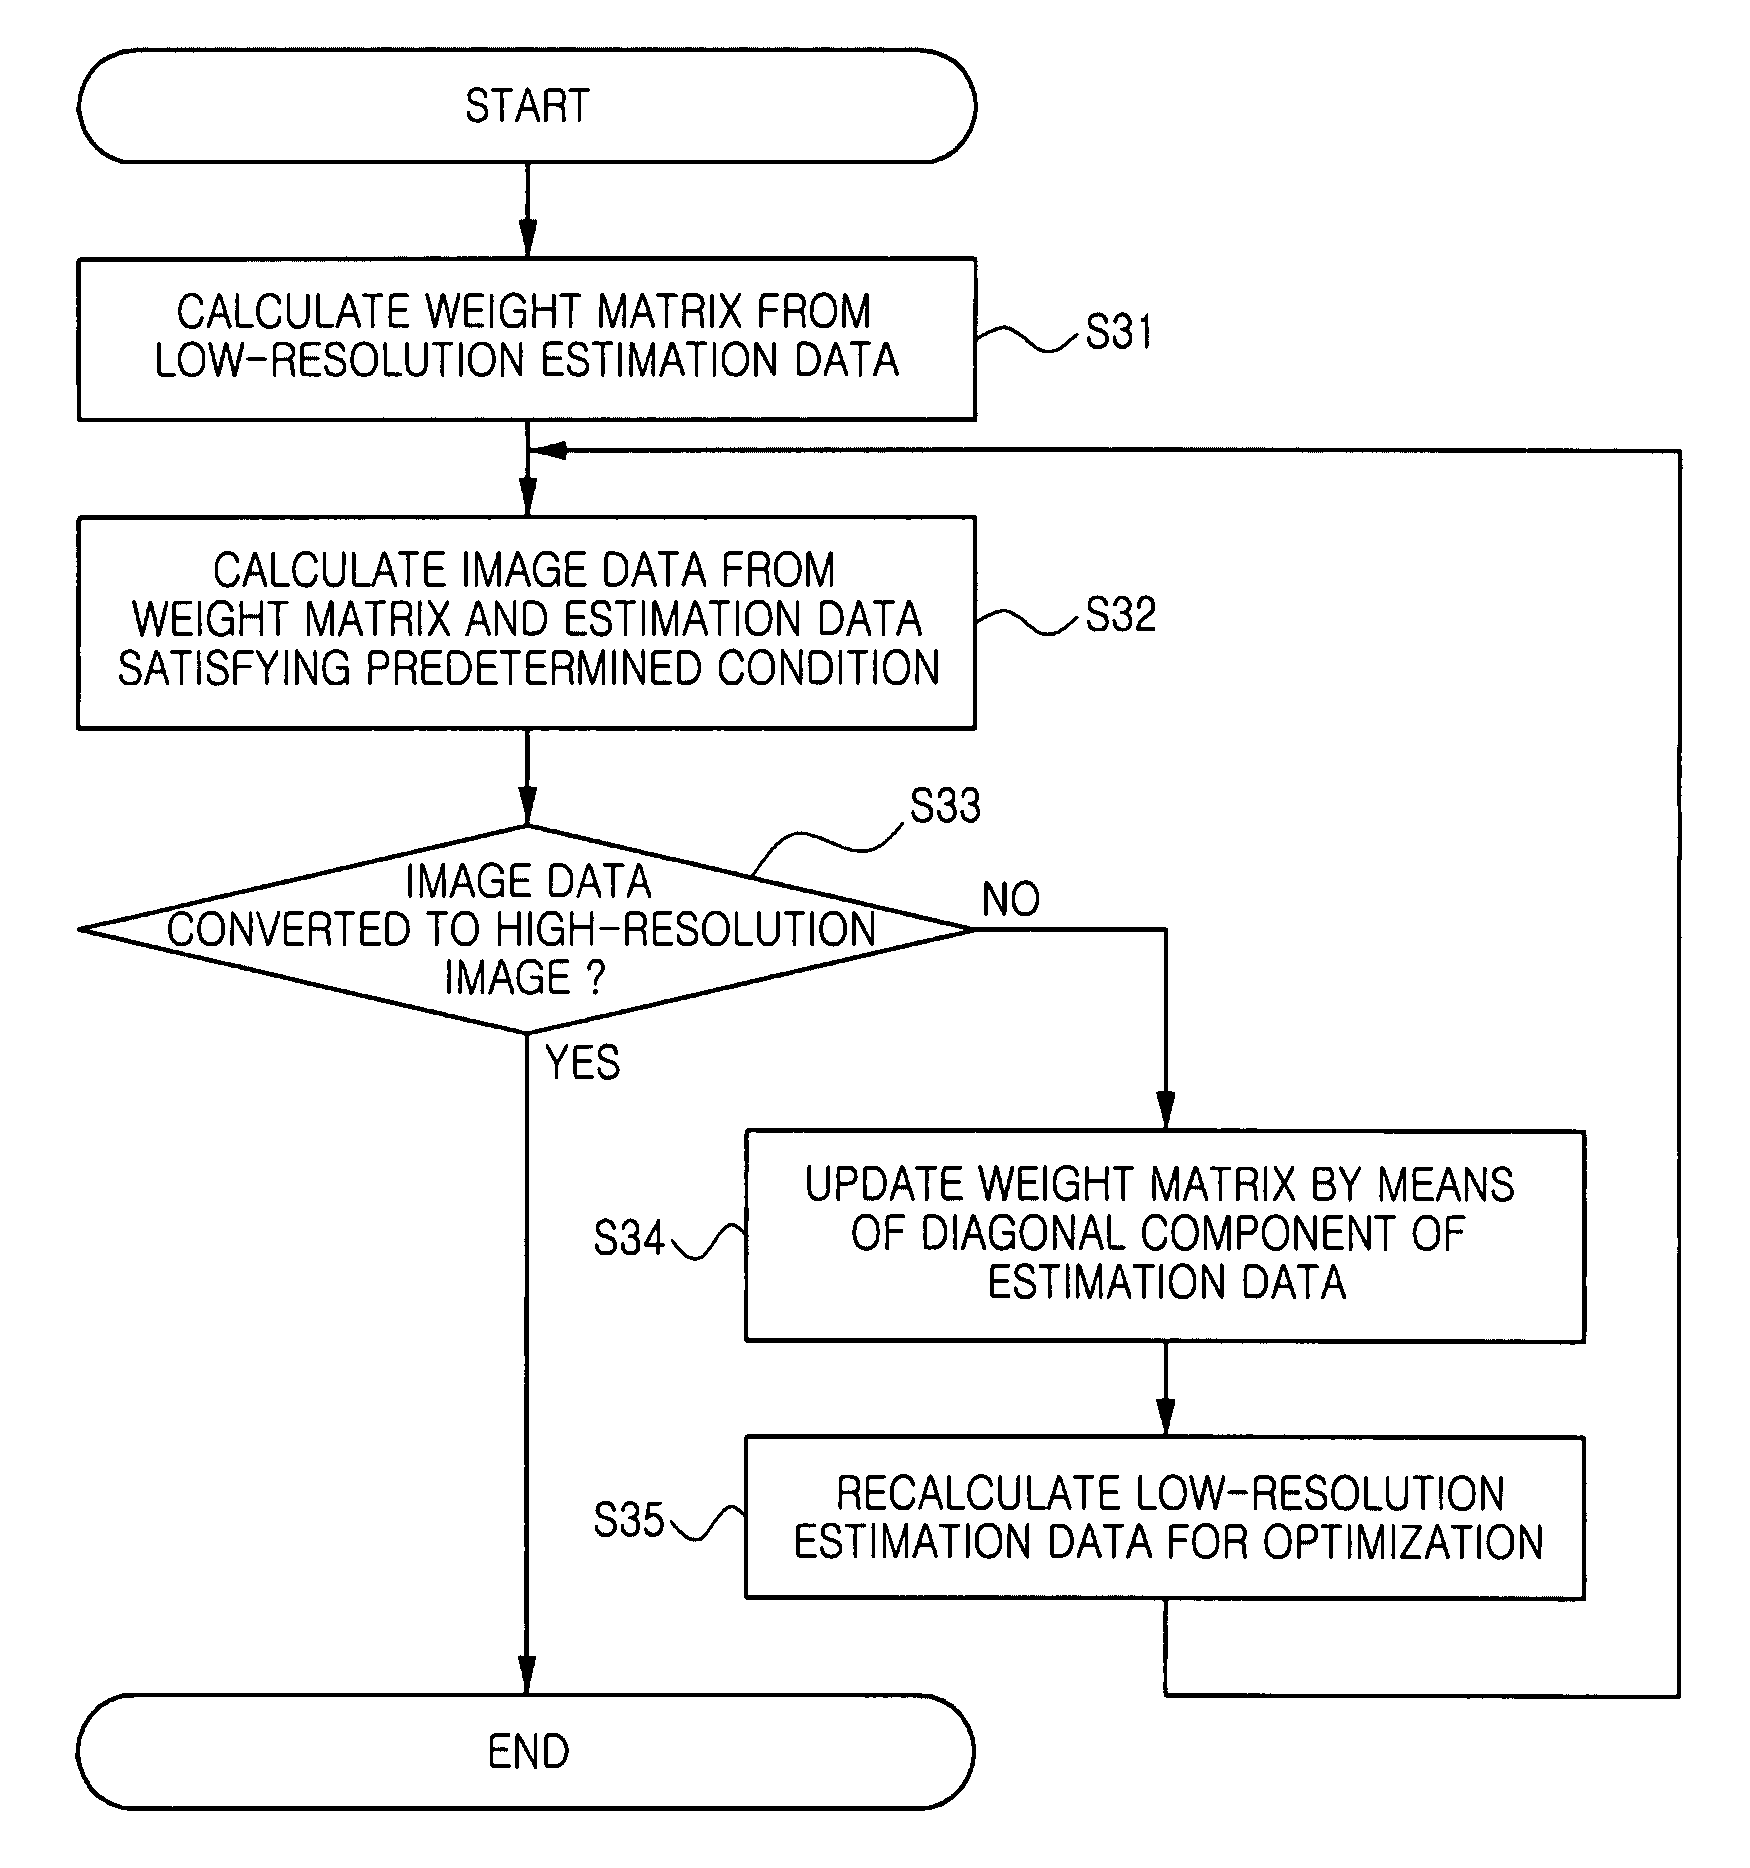 Method for super-resolution reconstruction using focal underdetermined system solver algorithm